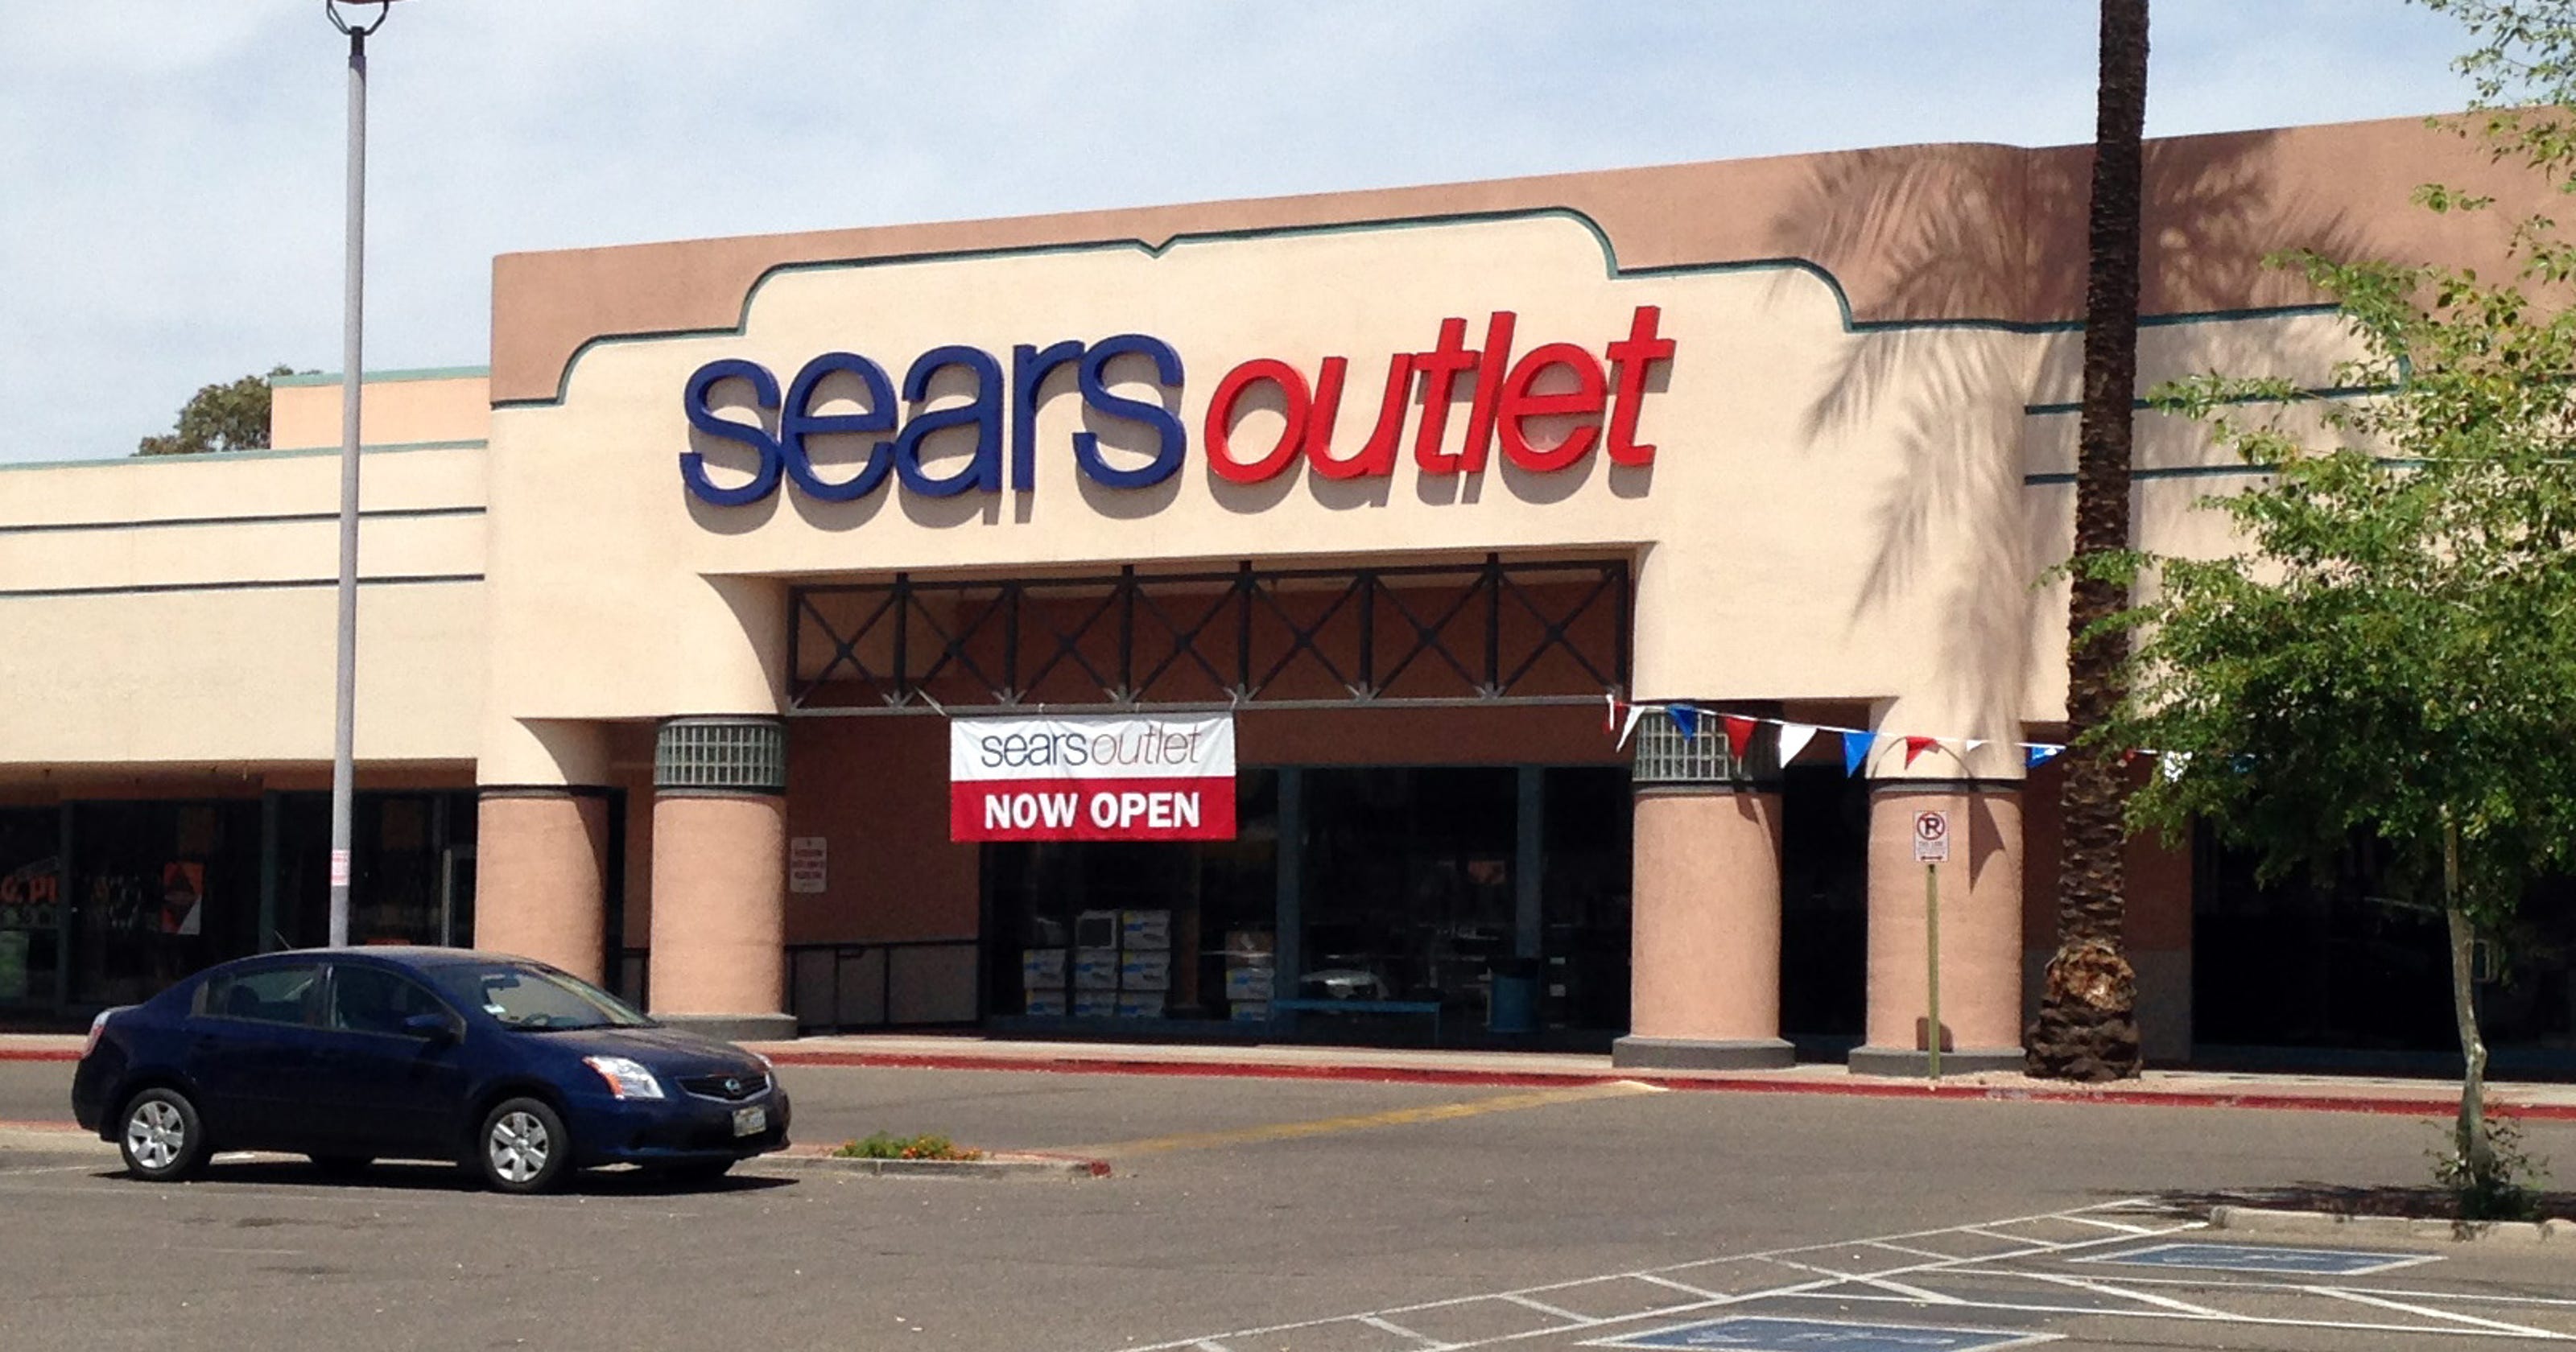 Sears Outlets and Home Appliance Showrooms in Arizona ...